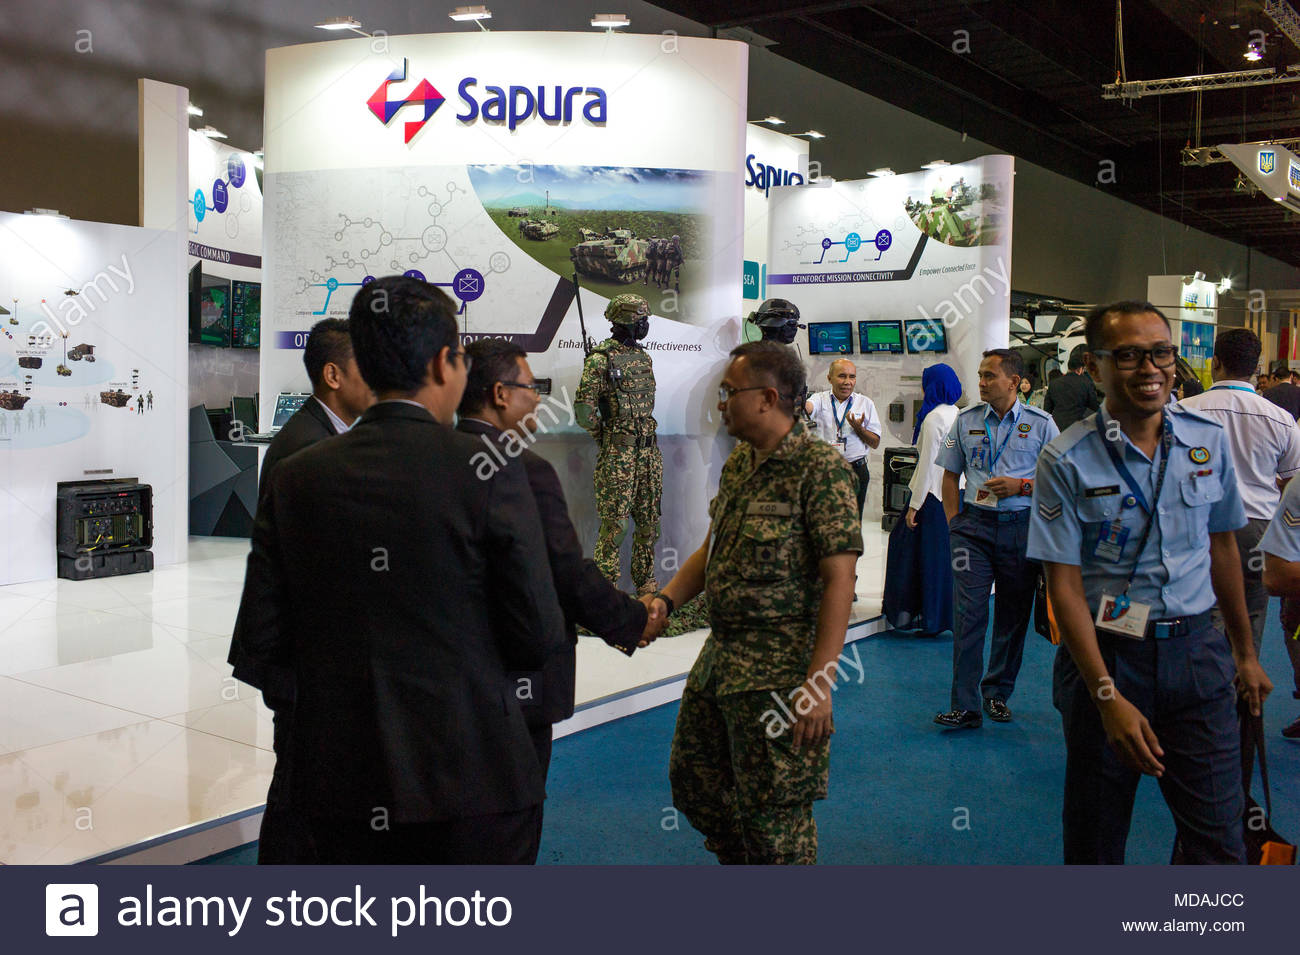 kuala-lumpur-malaysia-on-april-19-2018-an-exhibition-booth-of-sapura-is-seen-during-the-defence-services-asia-dsa-2018-international-exhibition-at-mitecmalaysia-international-trade-exhibition-center-in-kuala-lumpur-malaysia-on-april-19-2018-the-dsa-2018-is-the-top-5-defense-shows-in-the-world-1500-companies-from-60-nations-and-about-42000-trade-visitors-from-around-the-world-participated-in-the-exhibition-credit-chris-jungalamy-live-news-MDAJCC.jpg